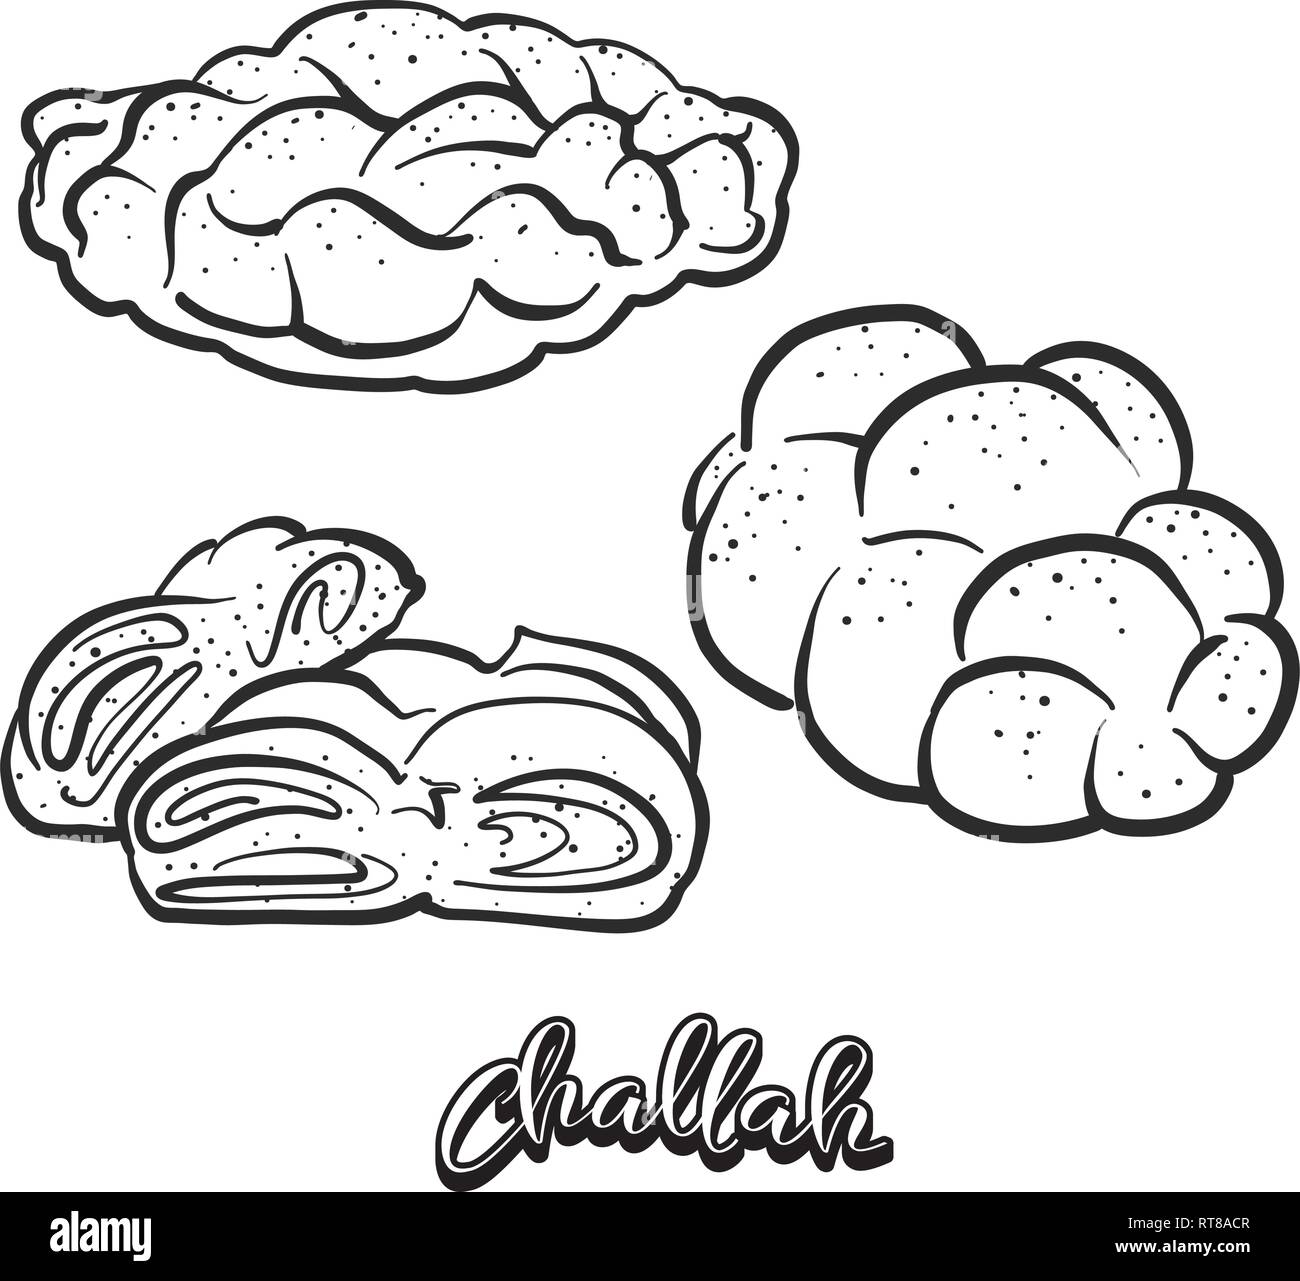 Hand drawn sketch of Challah bread. Vector drawing of Leavened food, usually known in Poland and Israel. Bread illustration series. Stock Vector